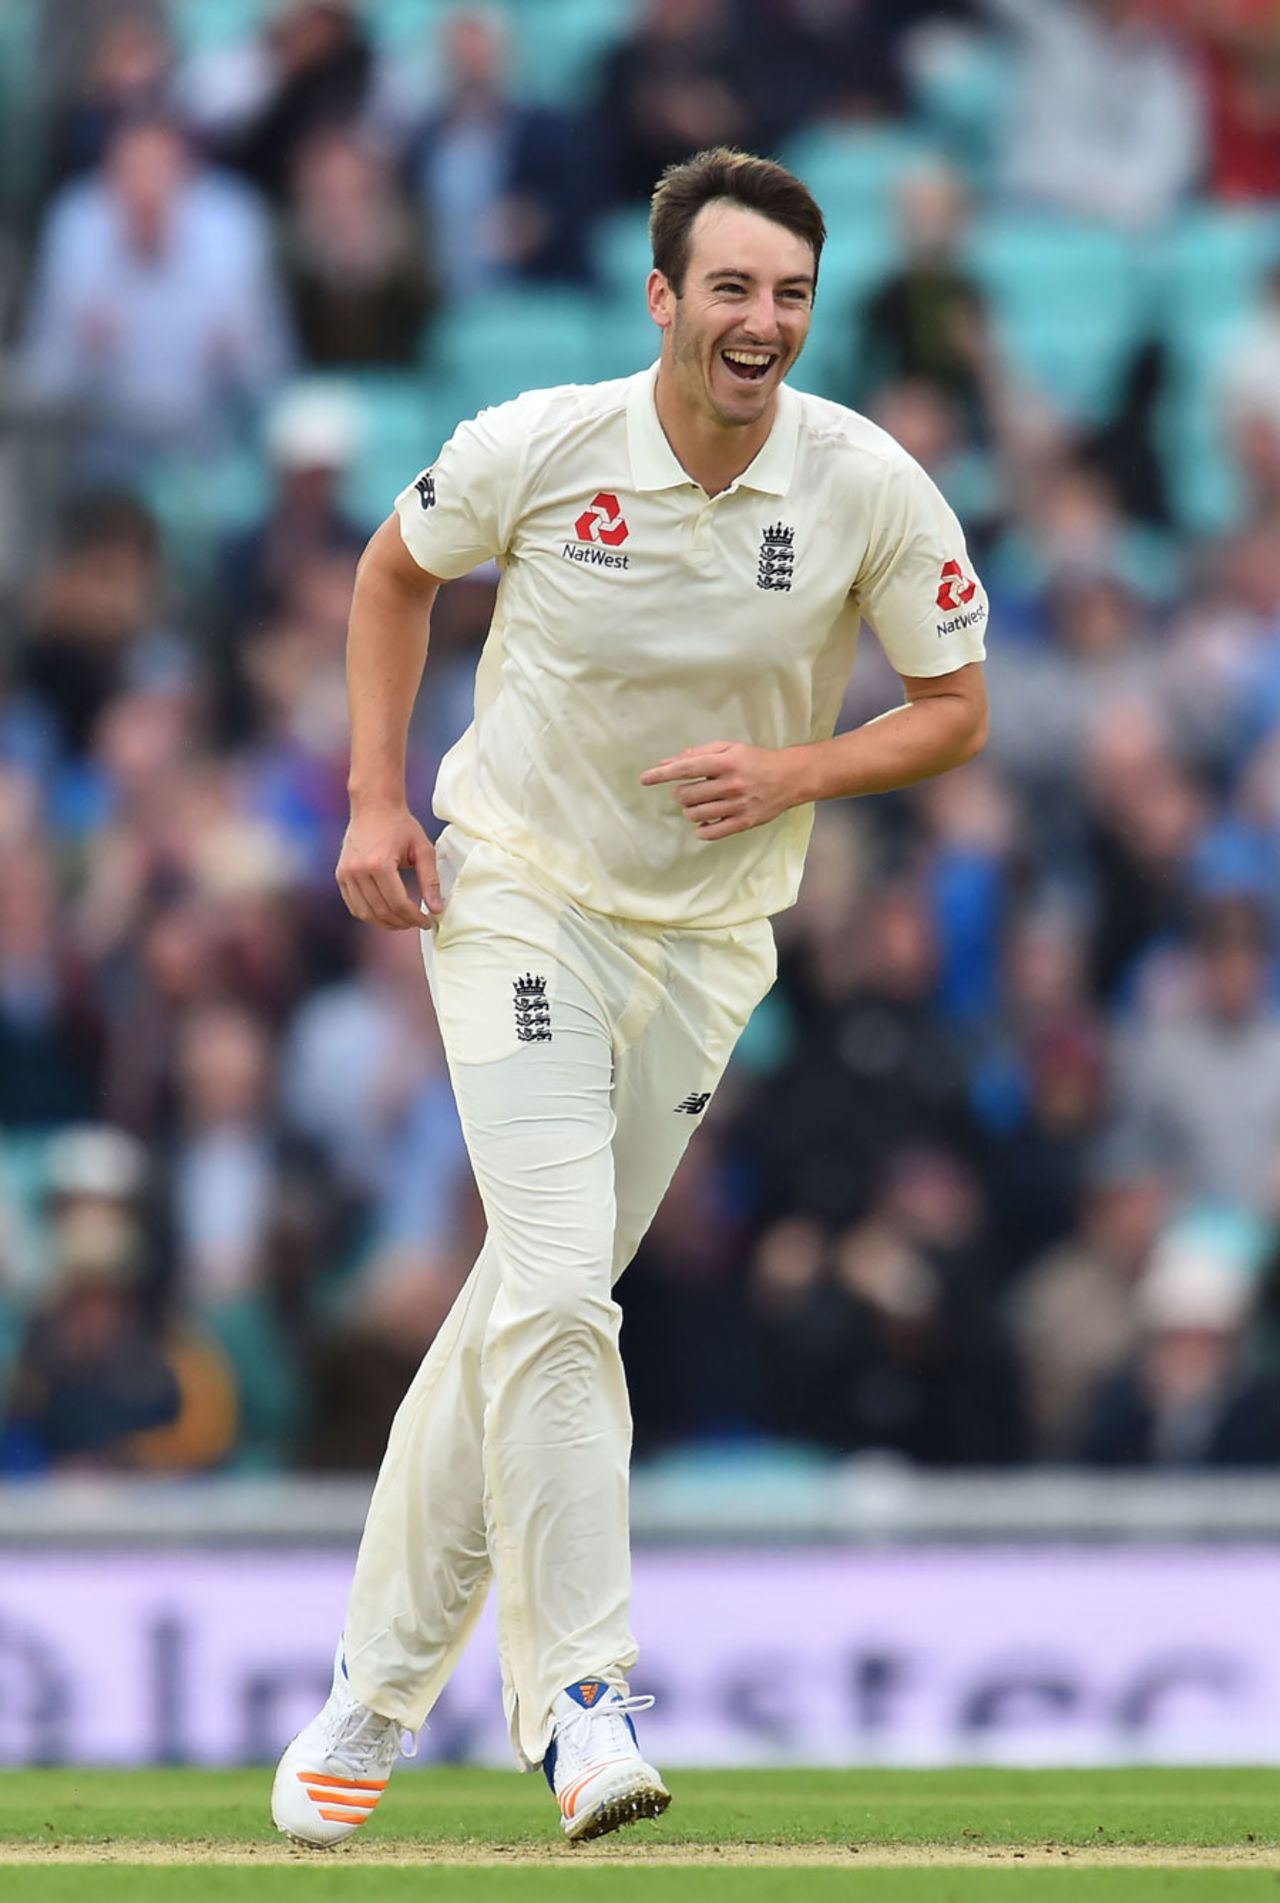 Toby Roland-Jones picked up a wicket in his second over on debut, England v South Africa, 3rd Investec Test, The Oval, 2nd day, July 28, 2017